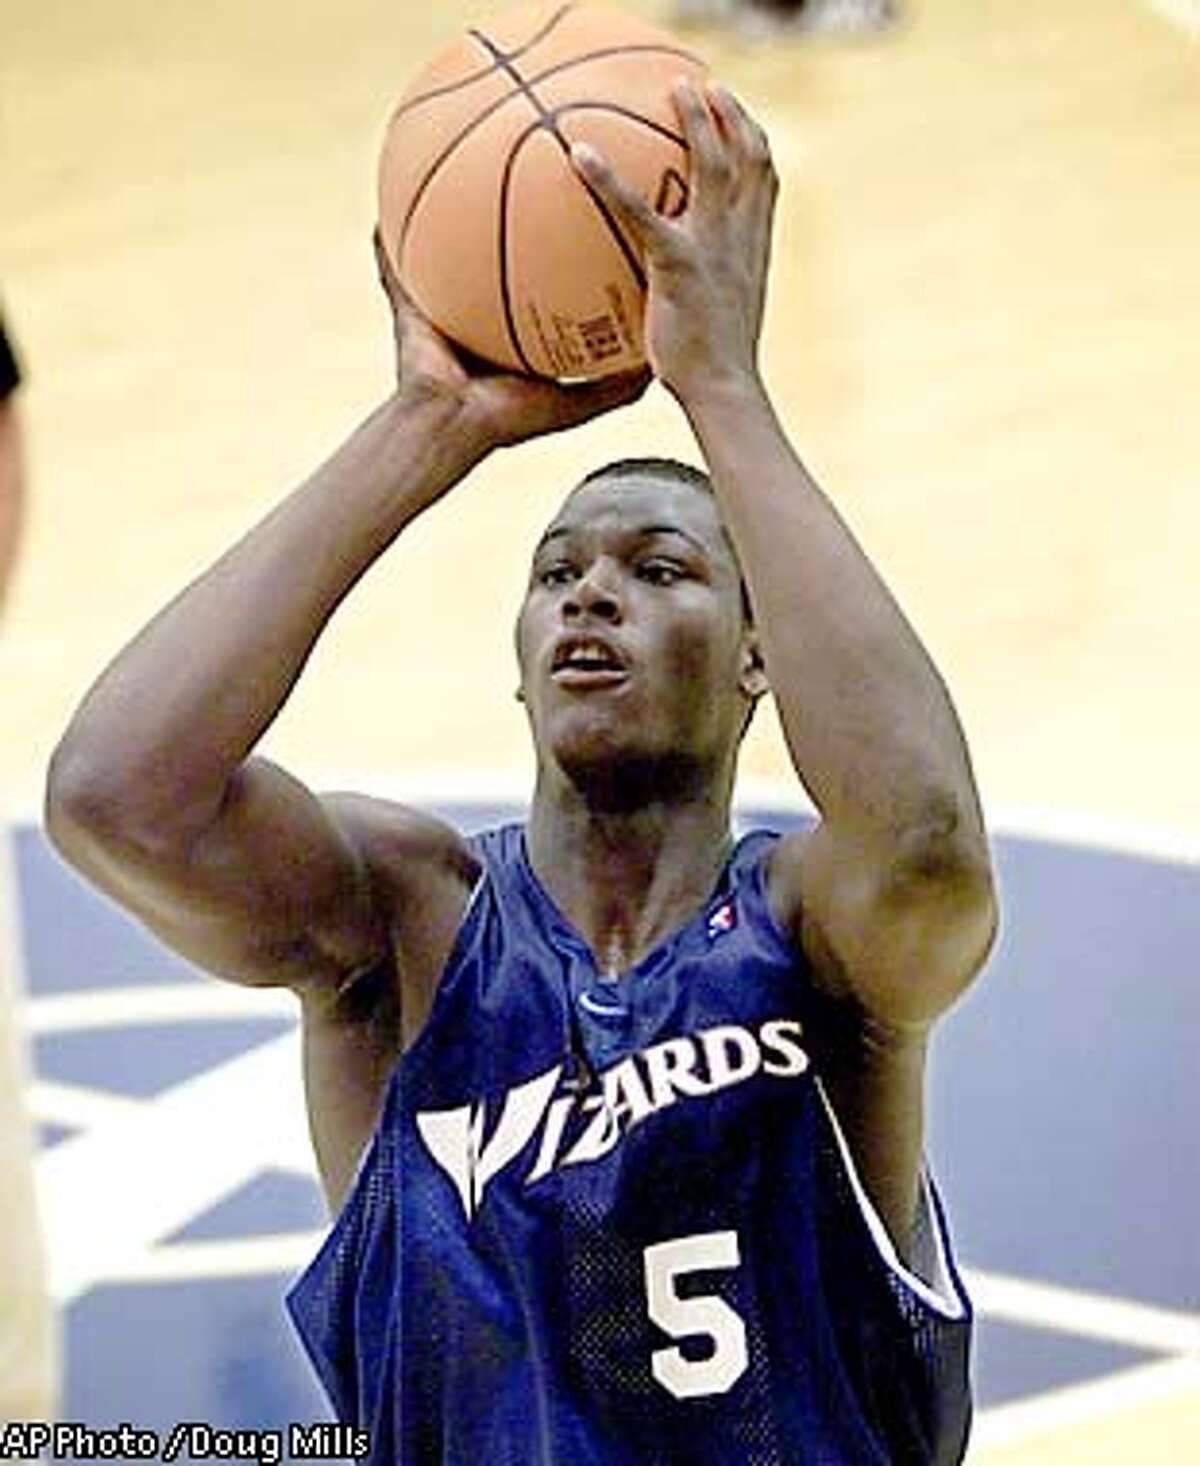 FILE - Washington Wizards first-round draft pick Kwame Brown practices at the MCI Center in Washington in this July 13, 2001 file photo. Although he's the first high school player ever chosen No. 1 overall in the NBA draft, Brown is still a country boy at heart trying to adjust to life with the Washington Wizards. (AP Photo/Doug Mills/File)